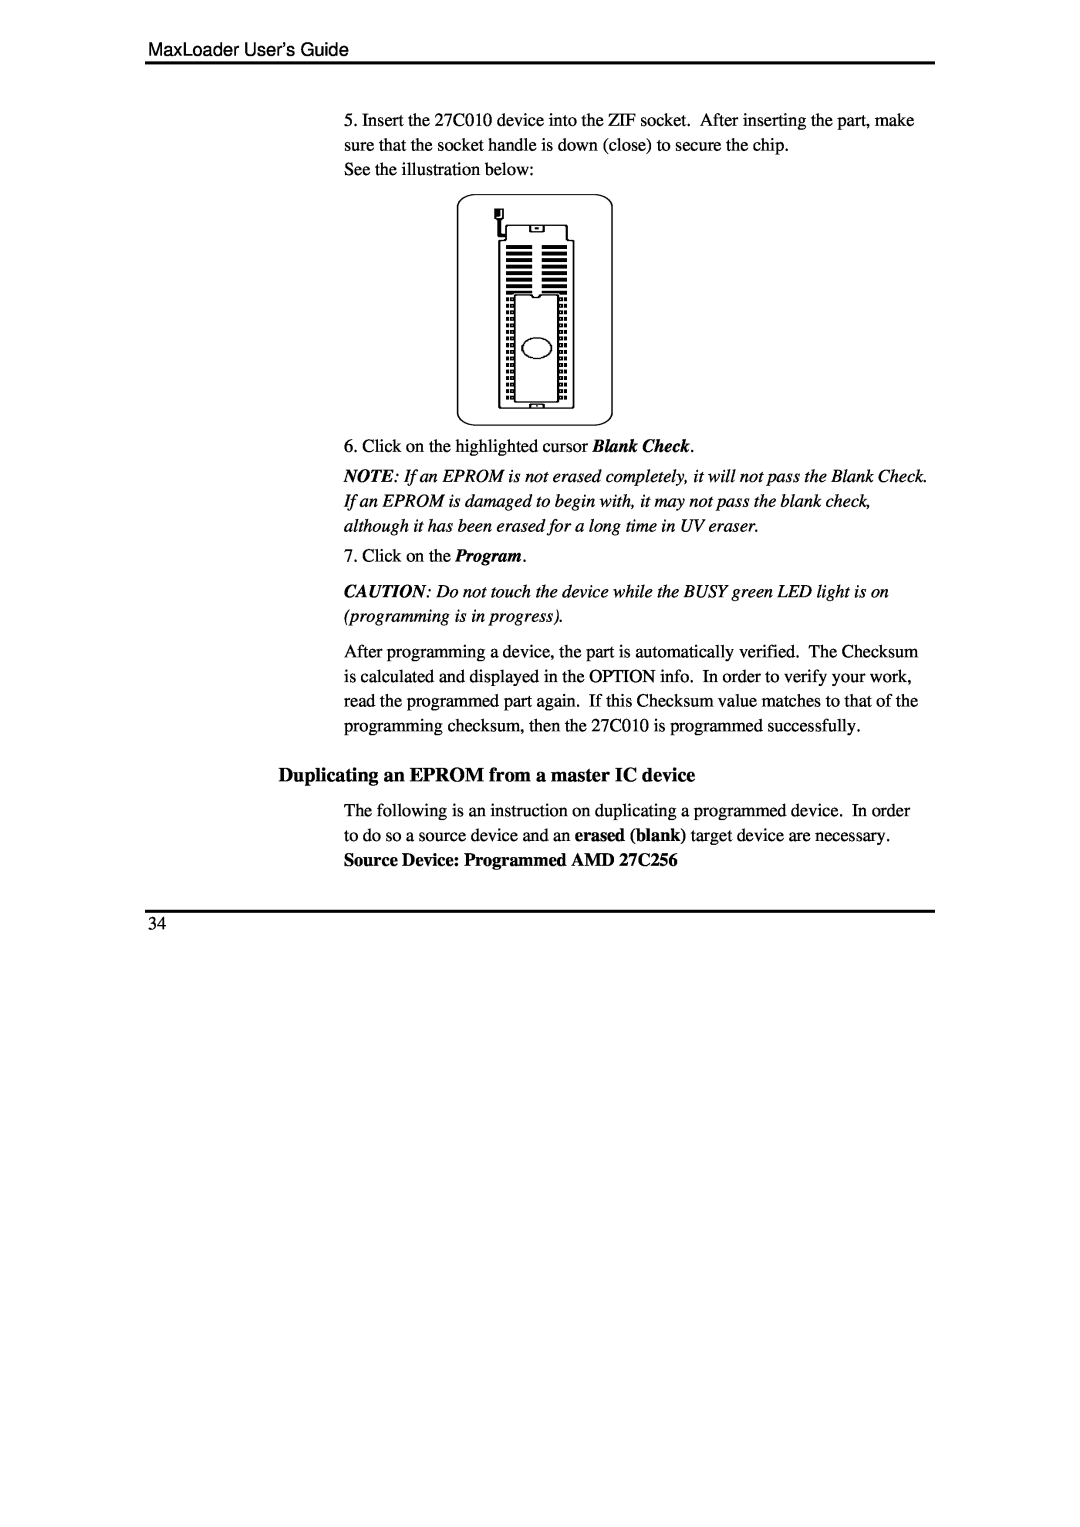 IBM MaxLoader manual Duplicating an EPROM from a master IC device, Source Device Programmed AMD 27C256 